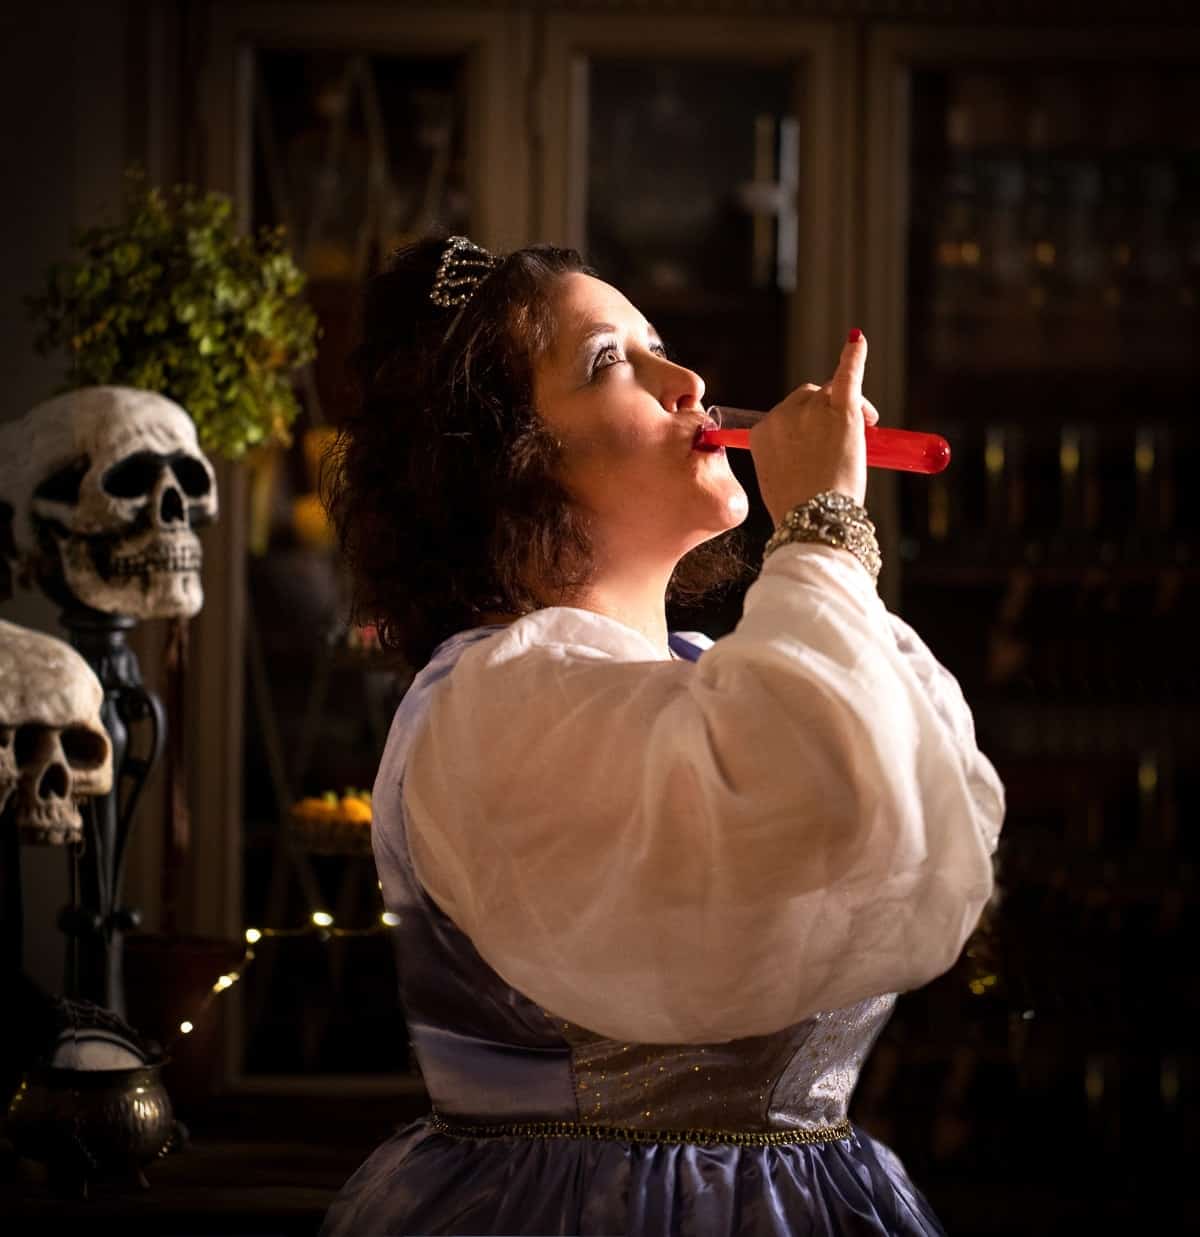 Woman dressed for Halloween as a princess taking a shot from the test tube